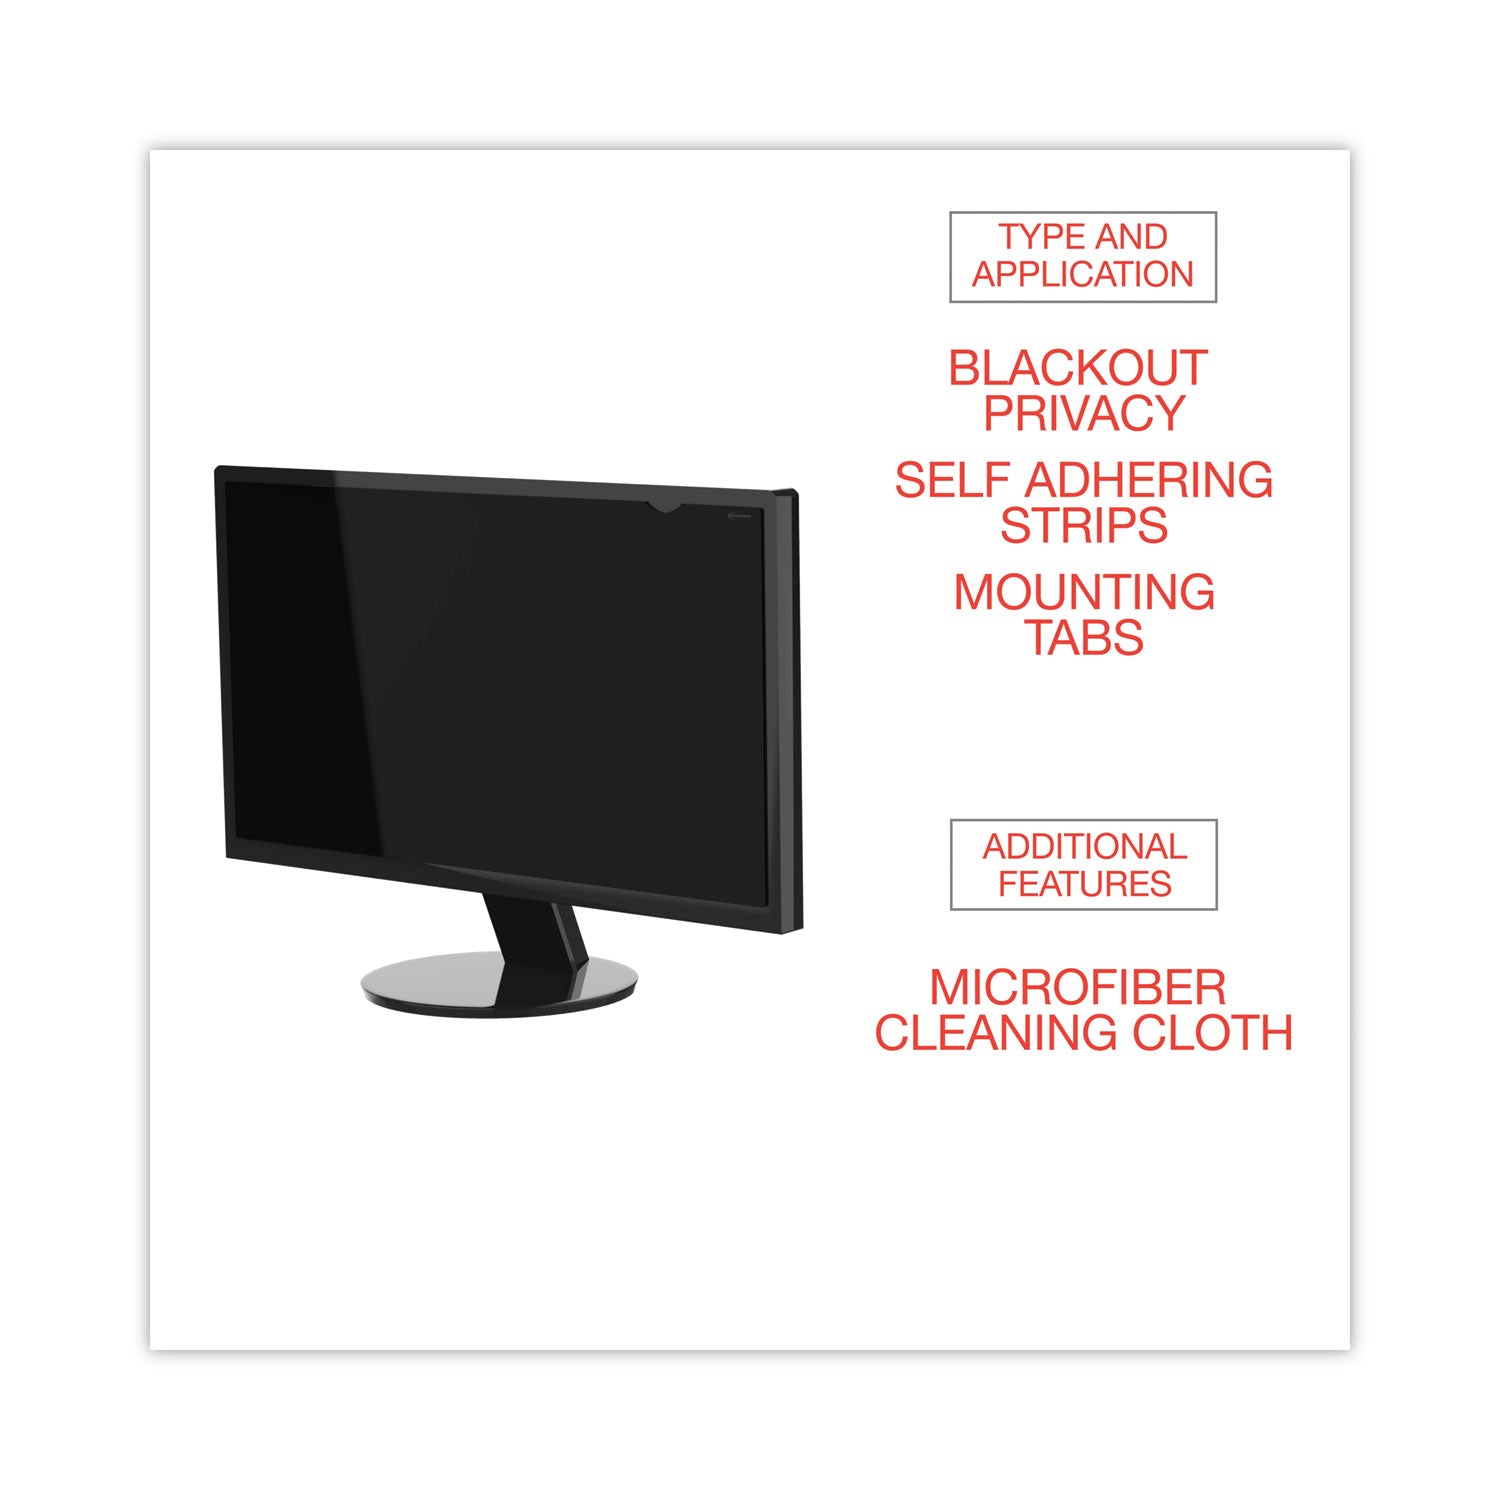 blackout-privacy-monitor-filter-for-195-widescreen-flat-panel-monitor-169-aspect-ratio_ivrblf195w - 6